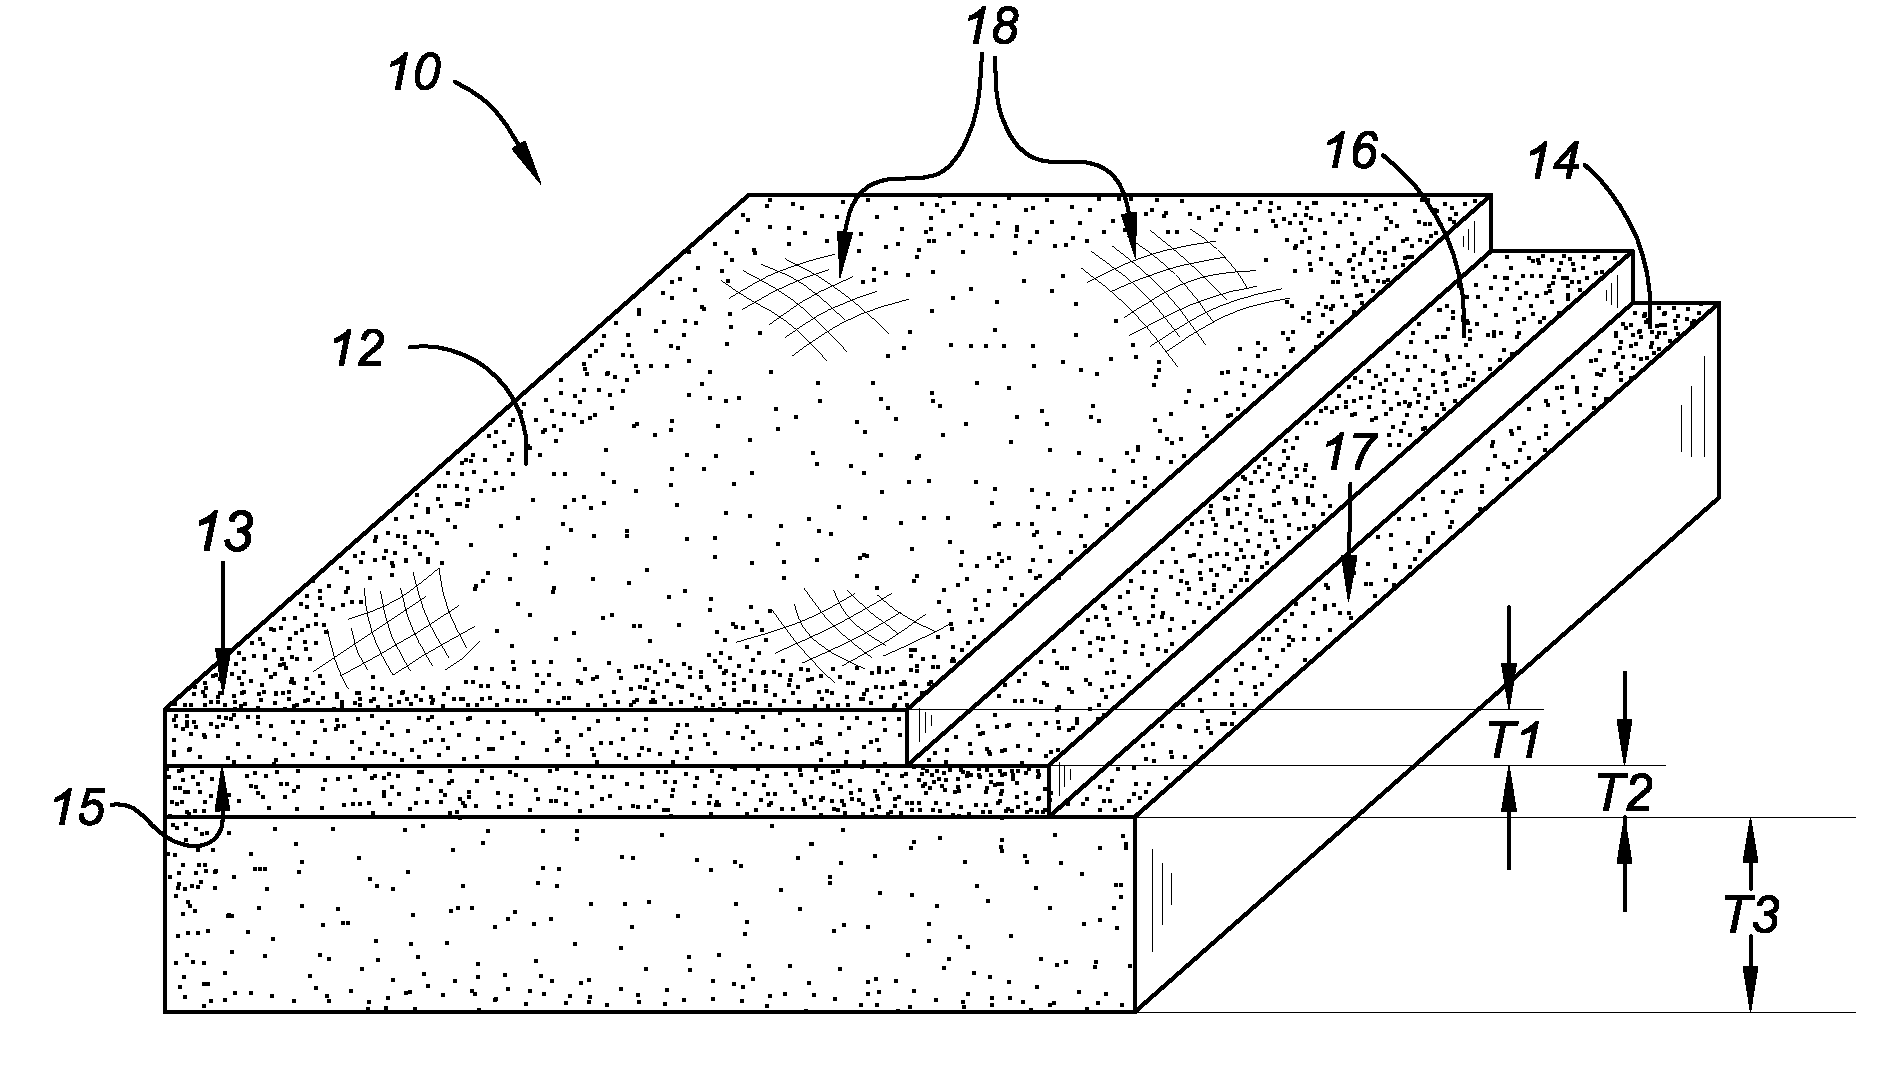 Bimetal laminate structure and method of making the same